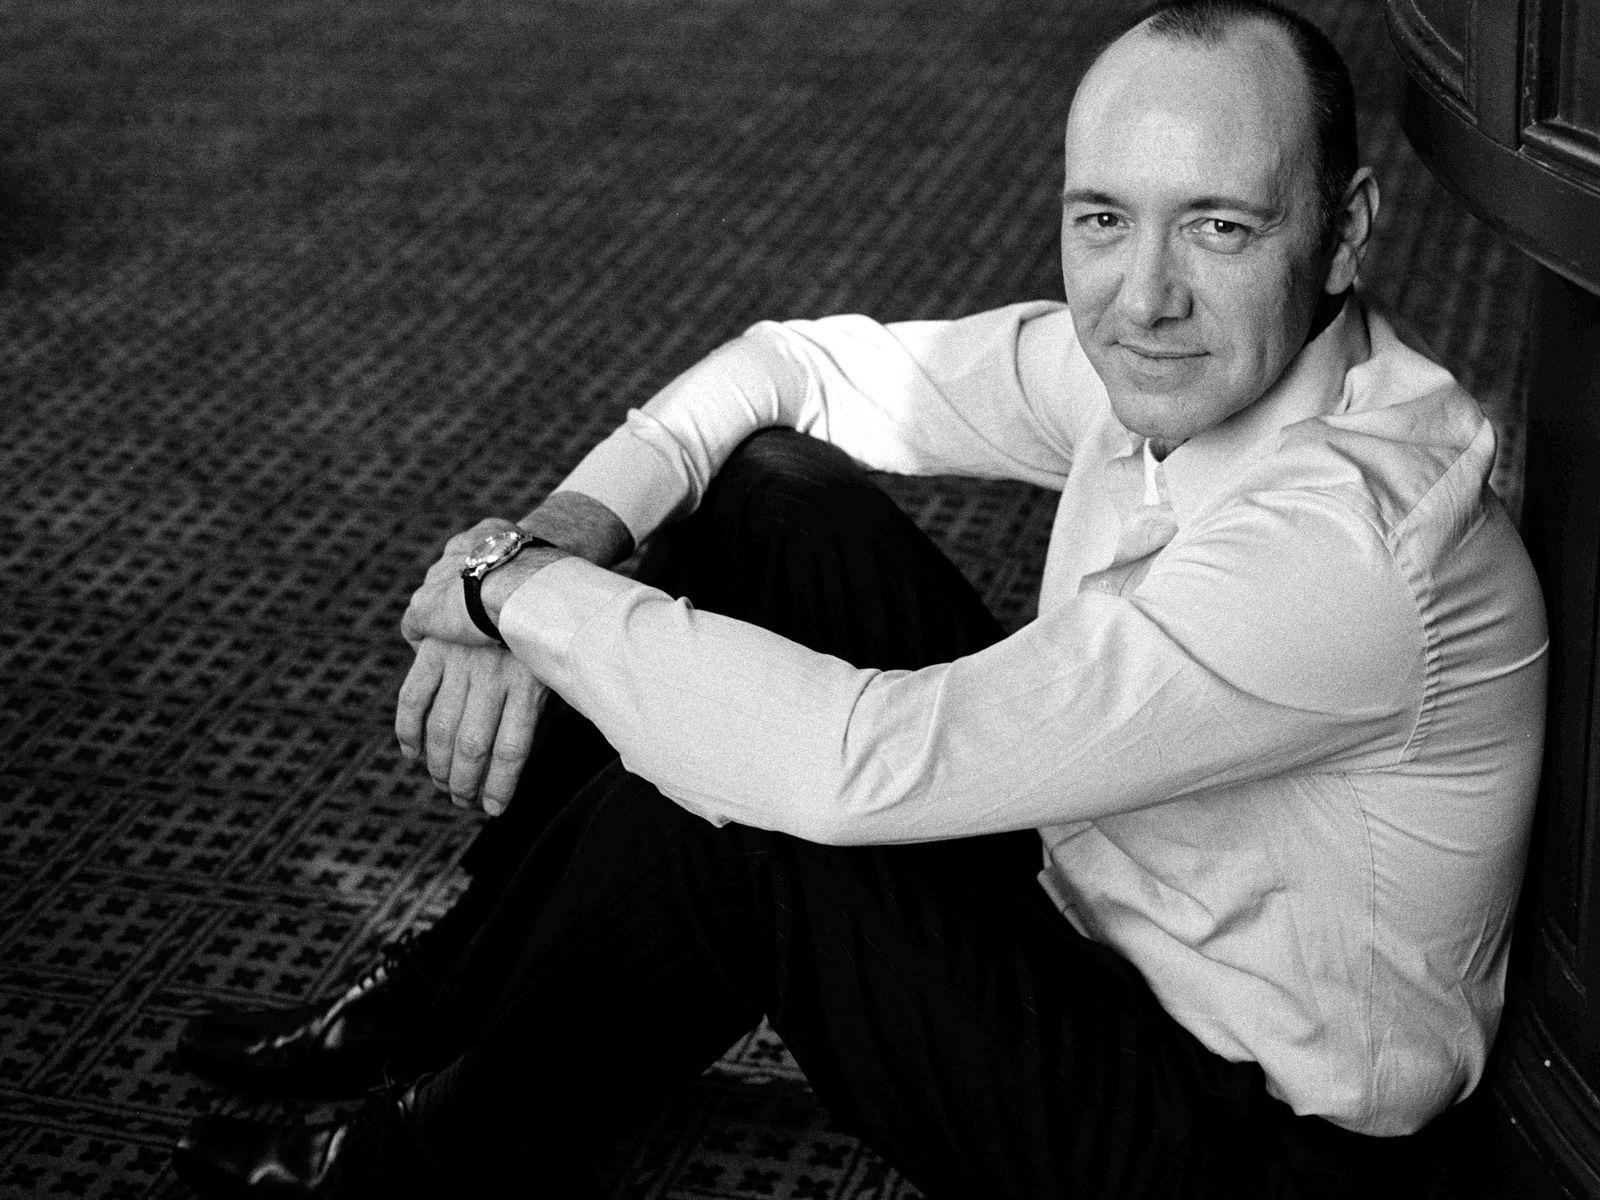 Kevin Spacey photo, picture, stills, image, wallpaper, gallery